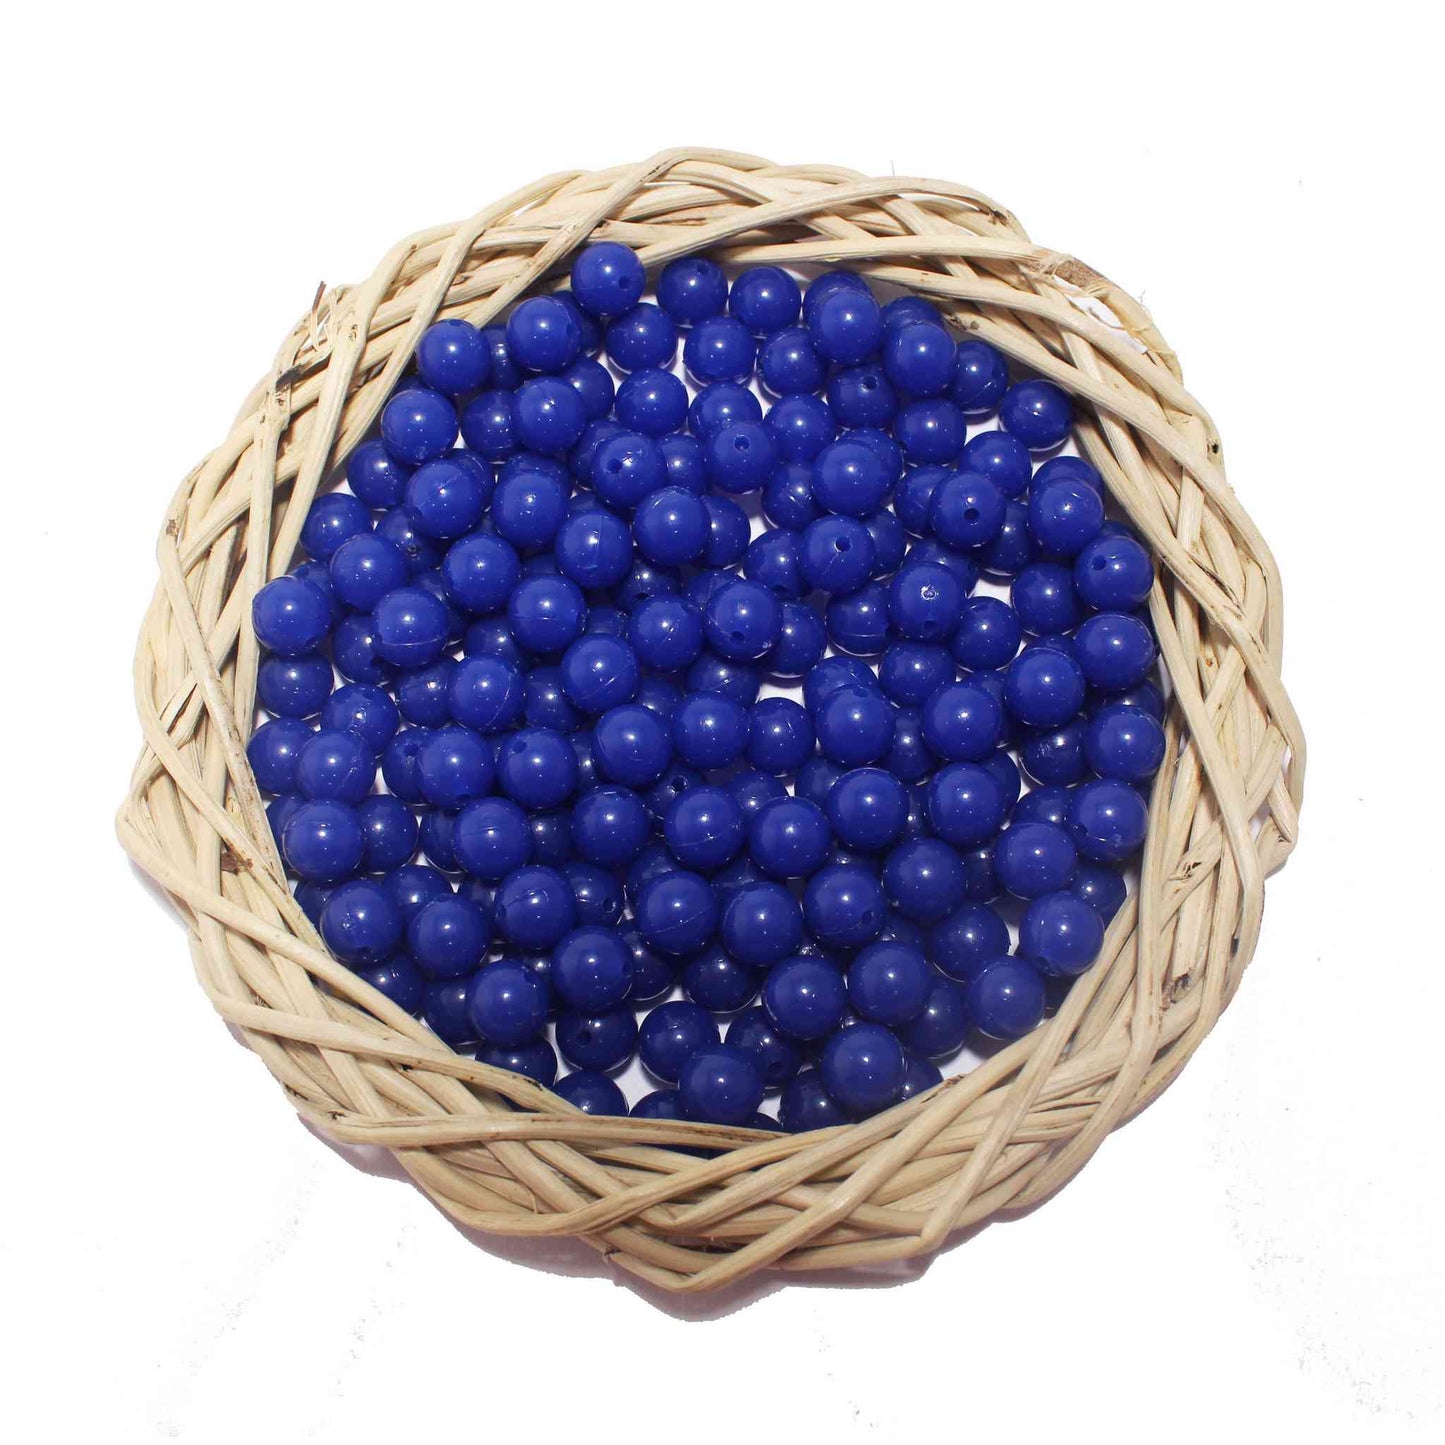 Indian Petals Premium quality Round Glass Beads for DIY Craft, Trousseau Packing or Decoration - Design 734, Dark Blue - Indian Petals